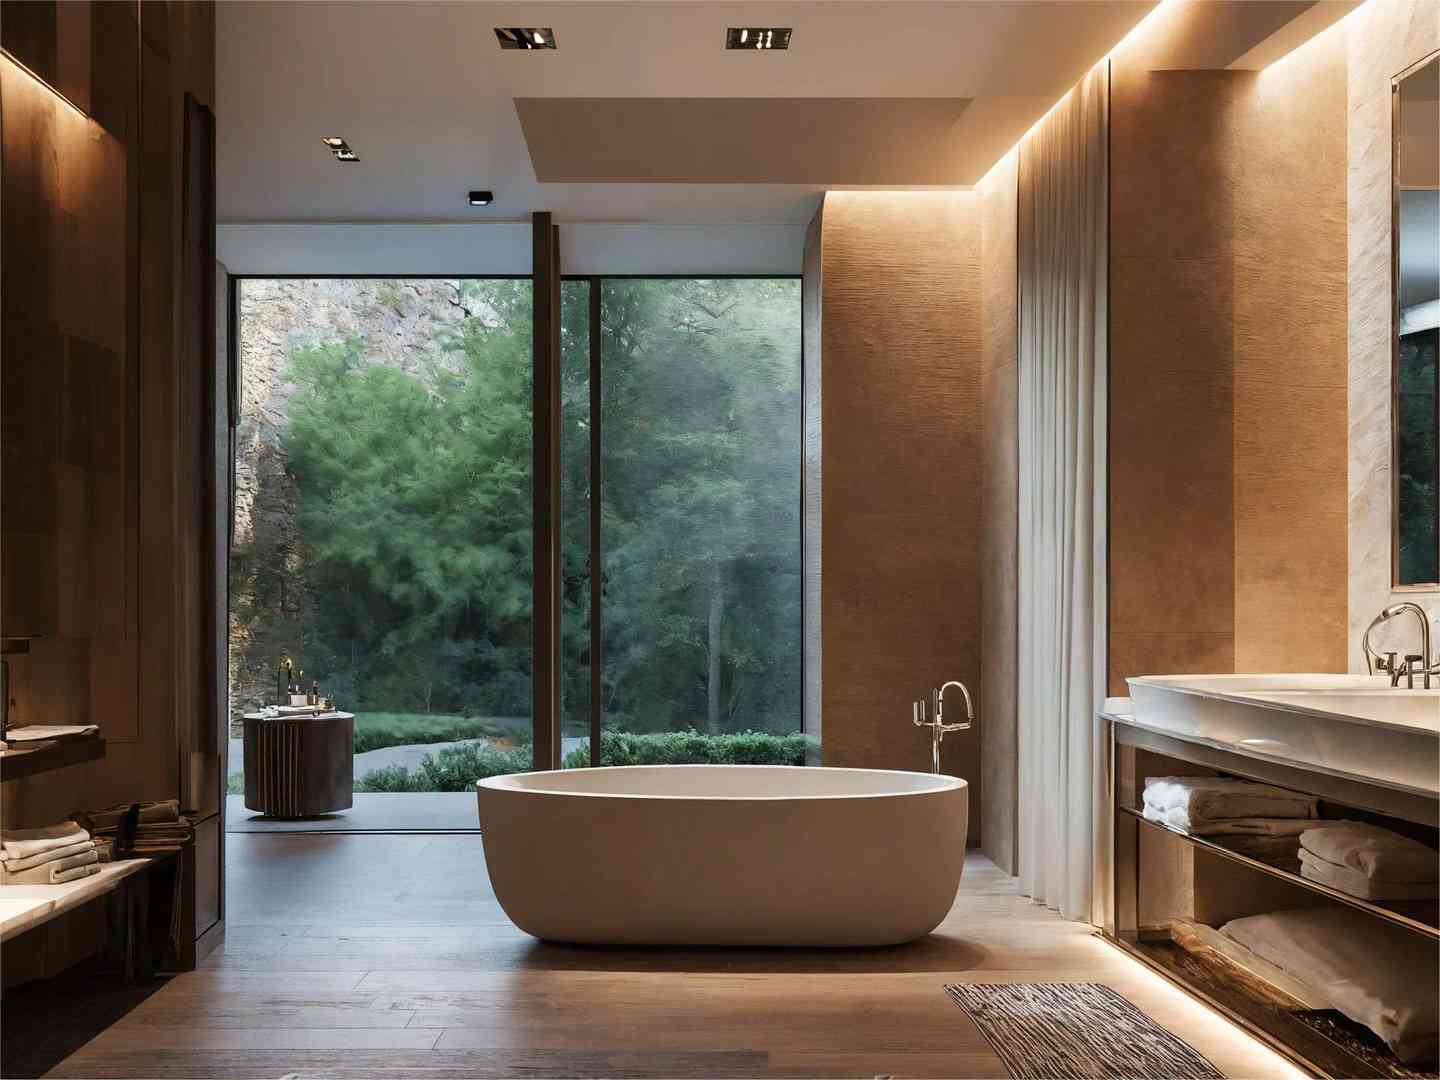 With the bathtub as the main display product1